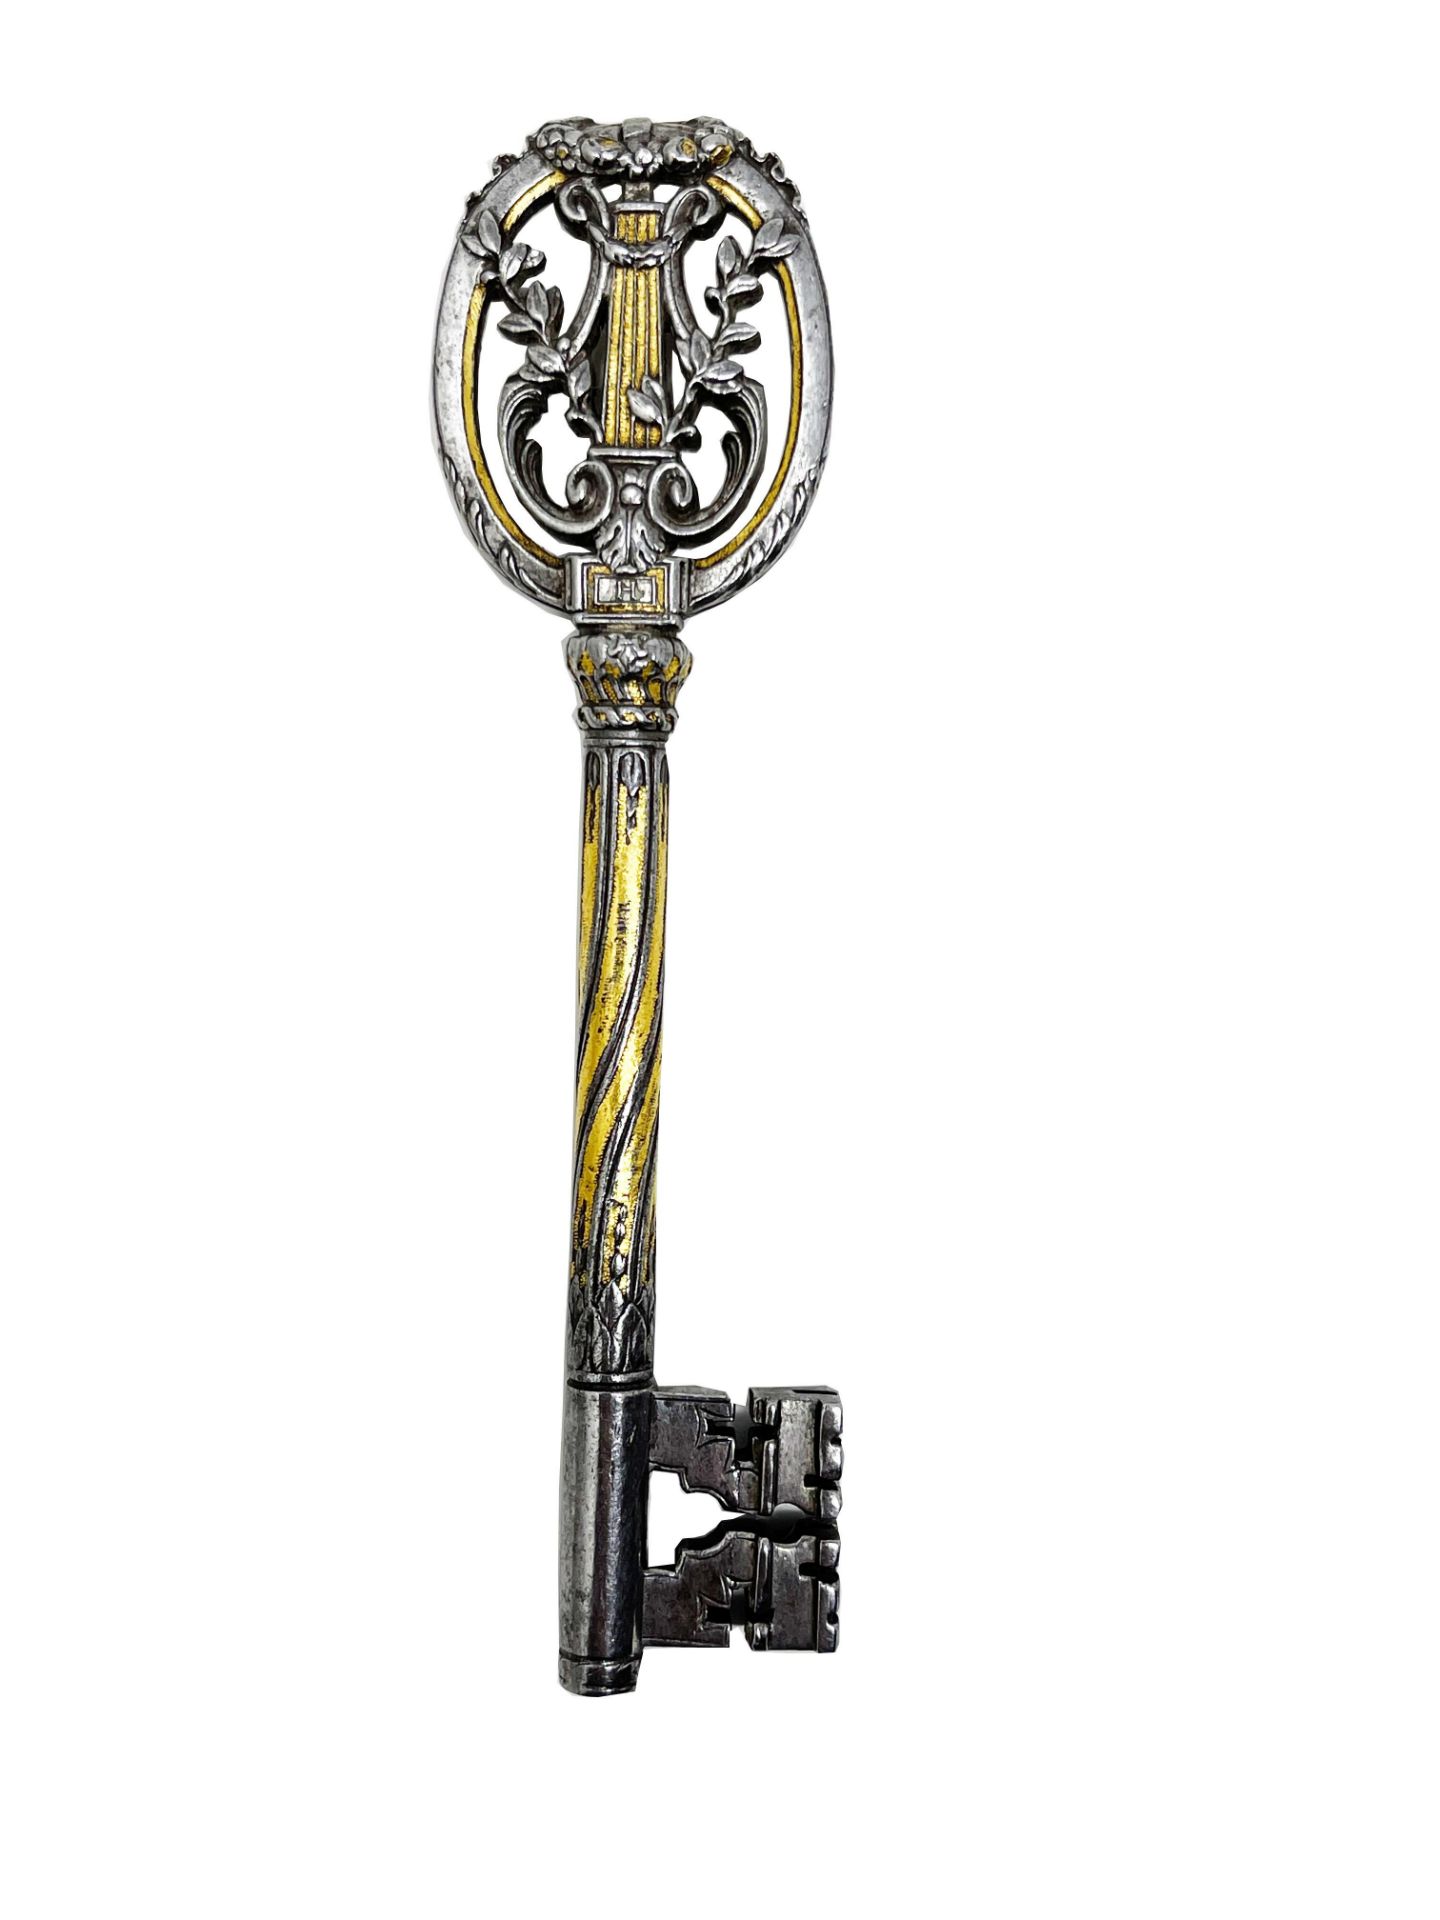 Iron key nielloed in gold. Oval ring topped by a wreath of flowers and containing a lyre and two - Image 3 of 3